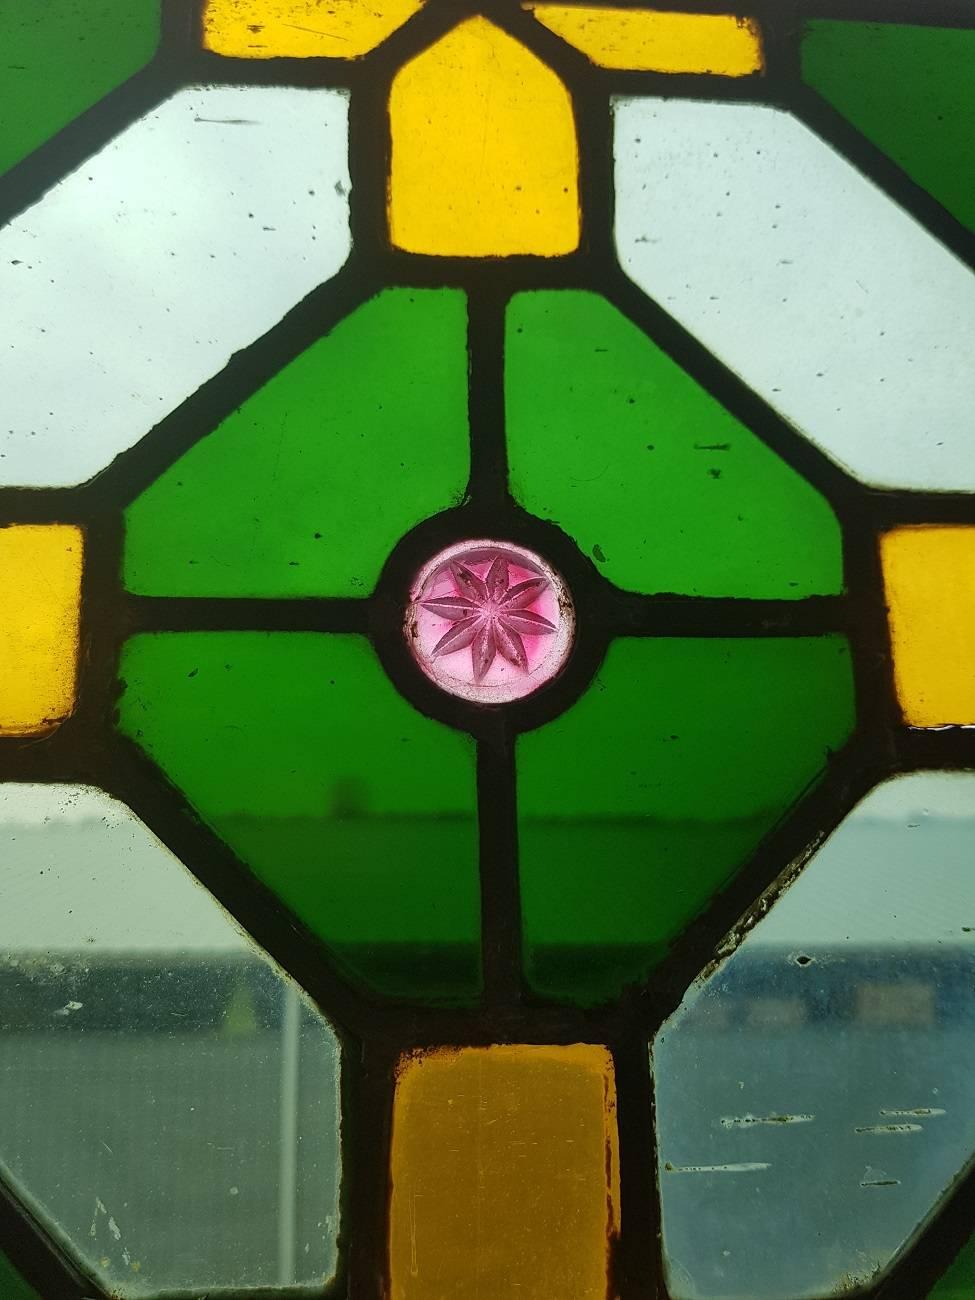 Late 19th century stained glass window from a religious building with beautiful colors and red stars, the outer edge is of a later date and has some cracks but still a wonderful decorative object.

The measurements are,
Depth 0.5 cm/ 0.19